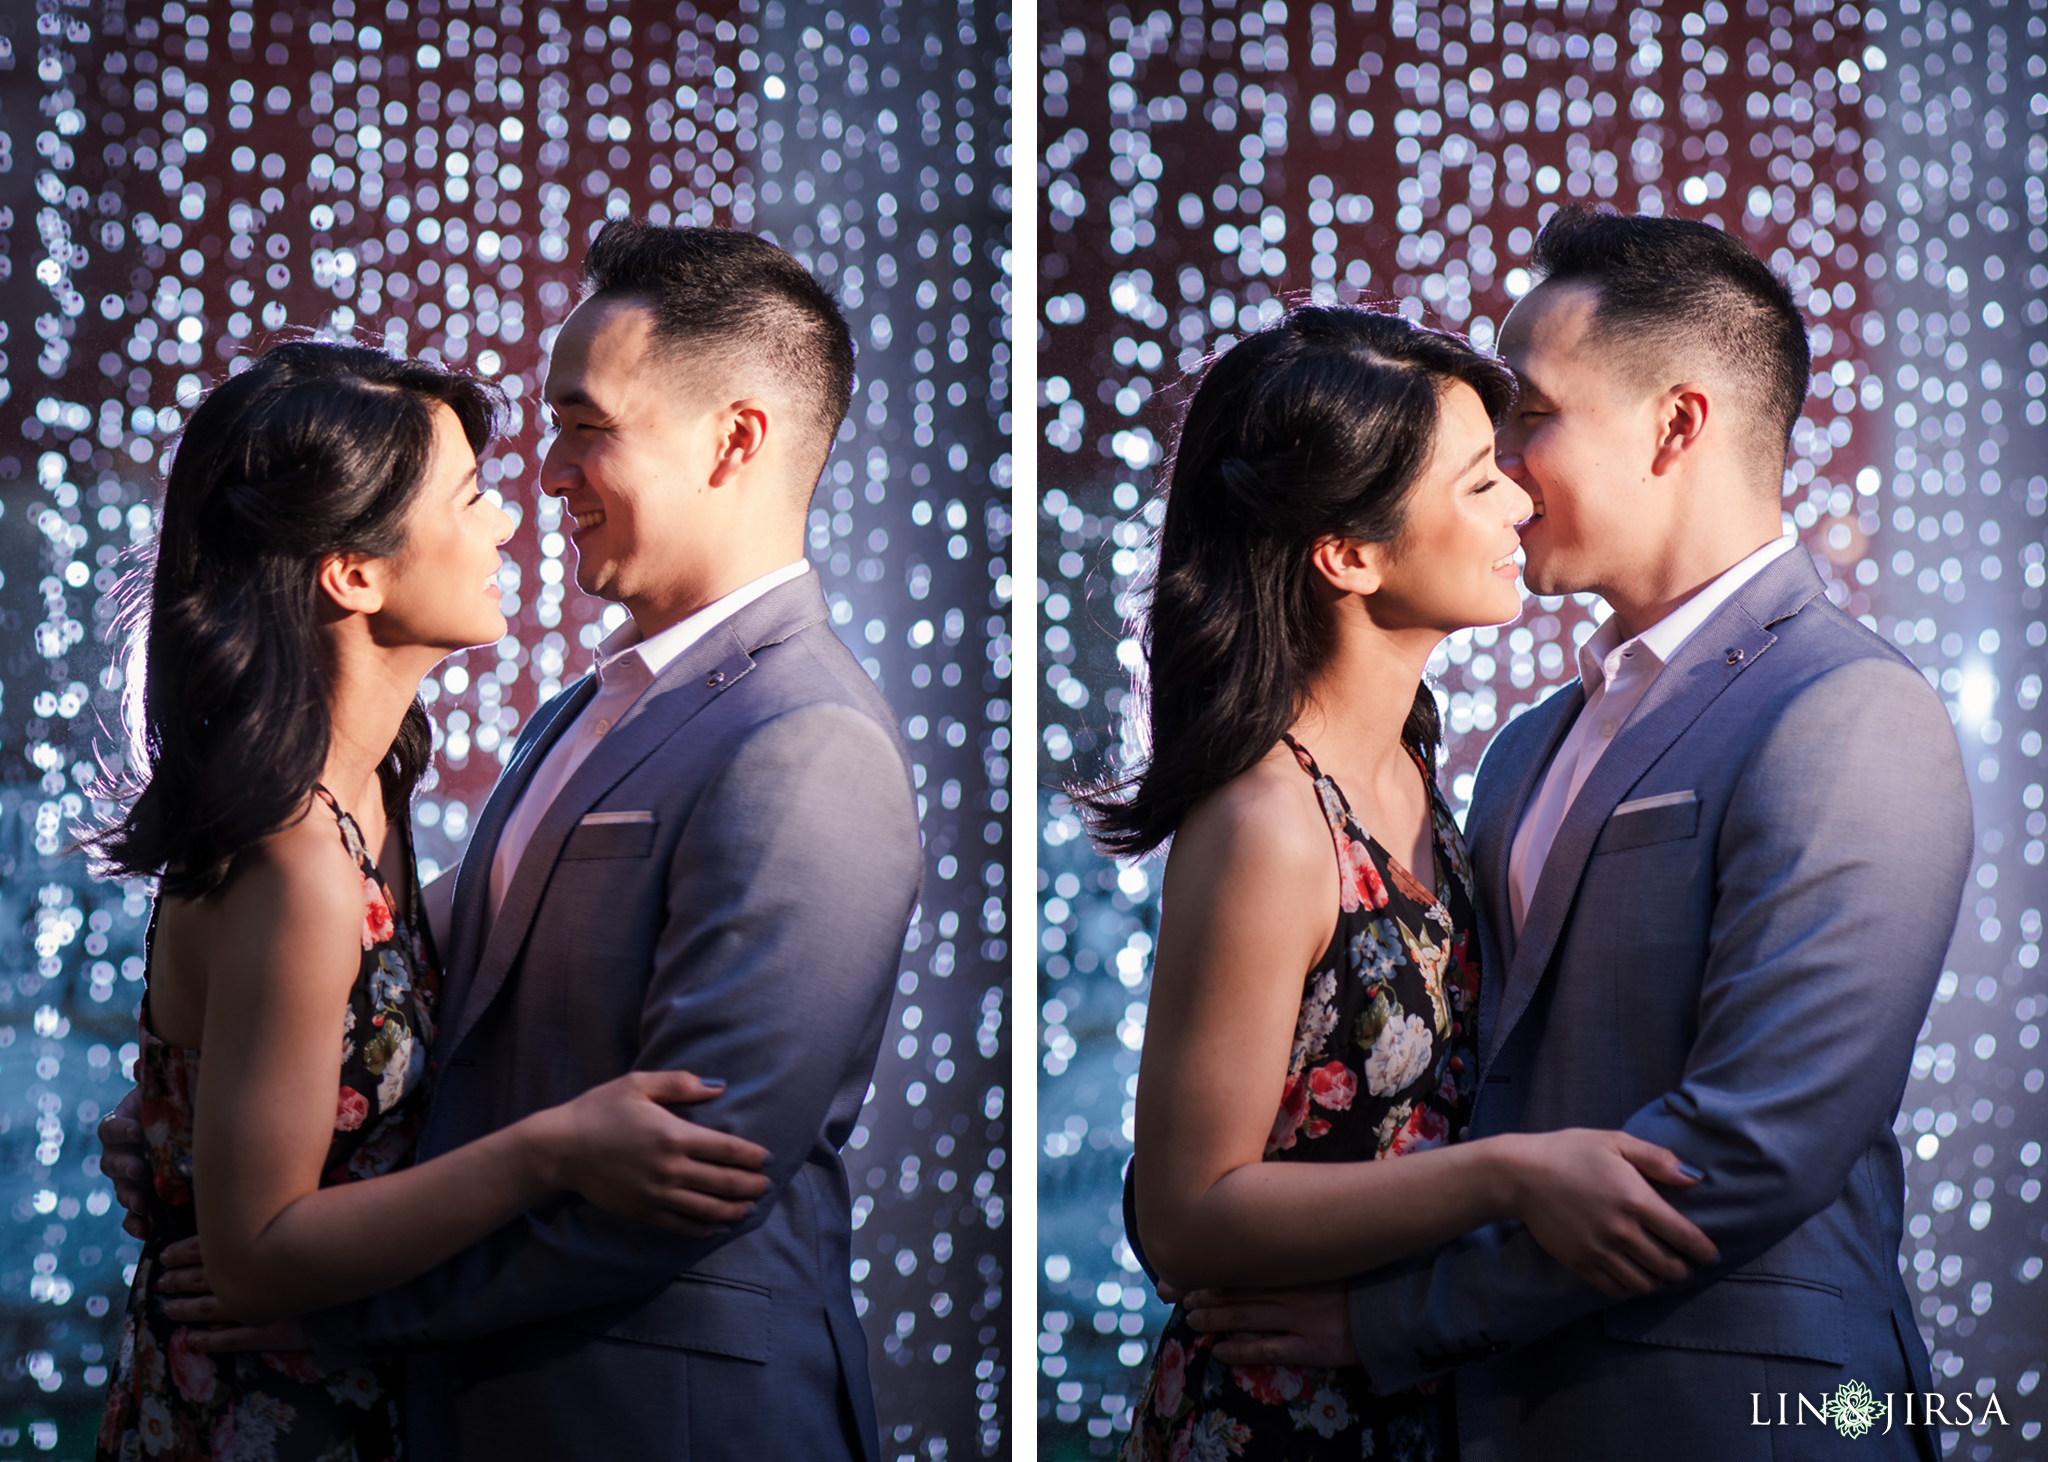 10 downtown los angeles engagement photography